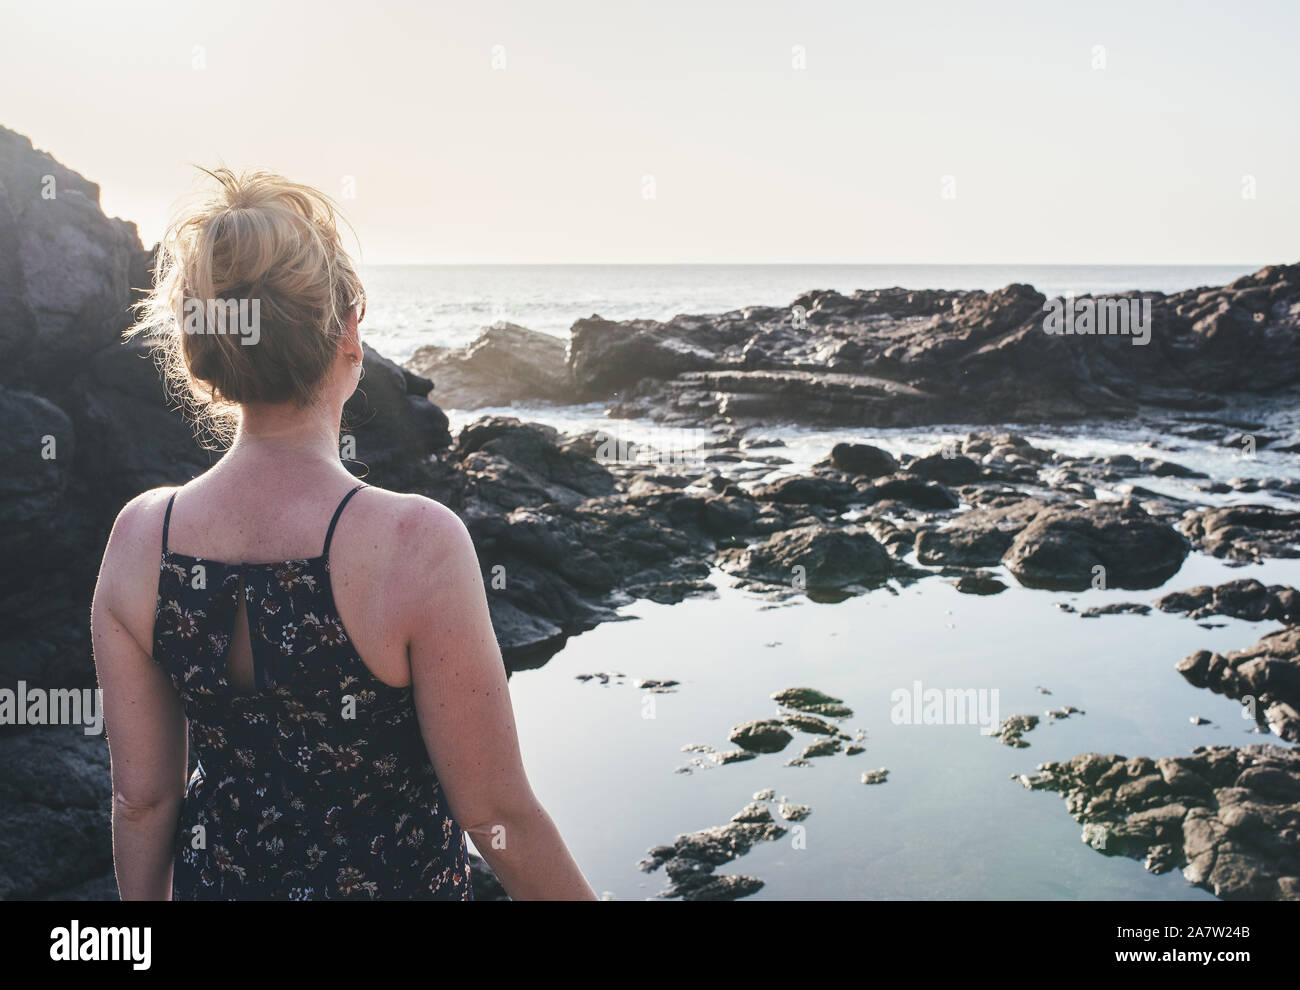 blonde woman in summer dress standing at rocky shore looking at ocean in sunlight Stock Photo